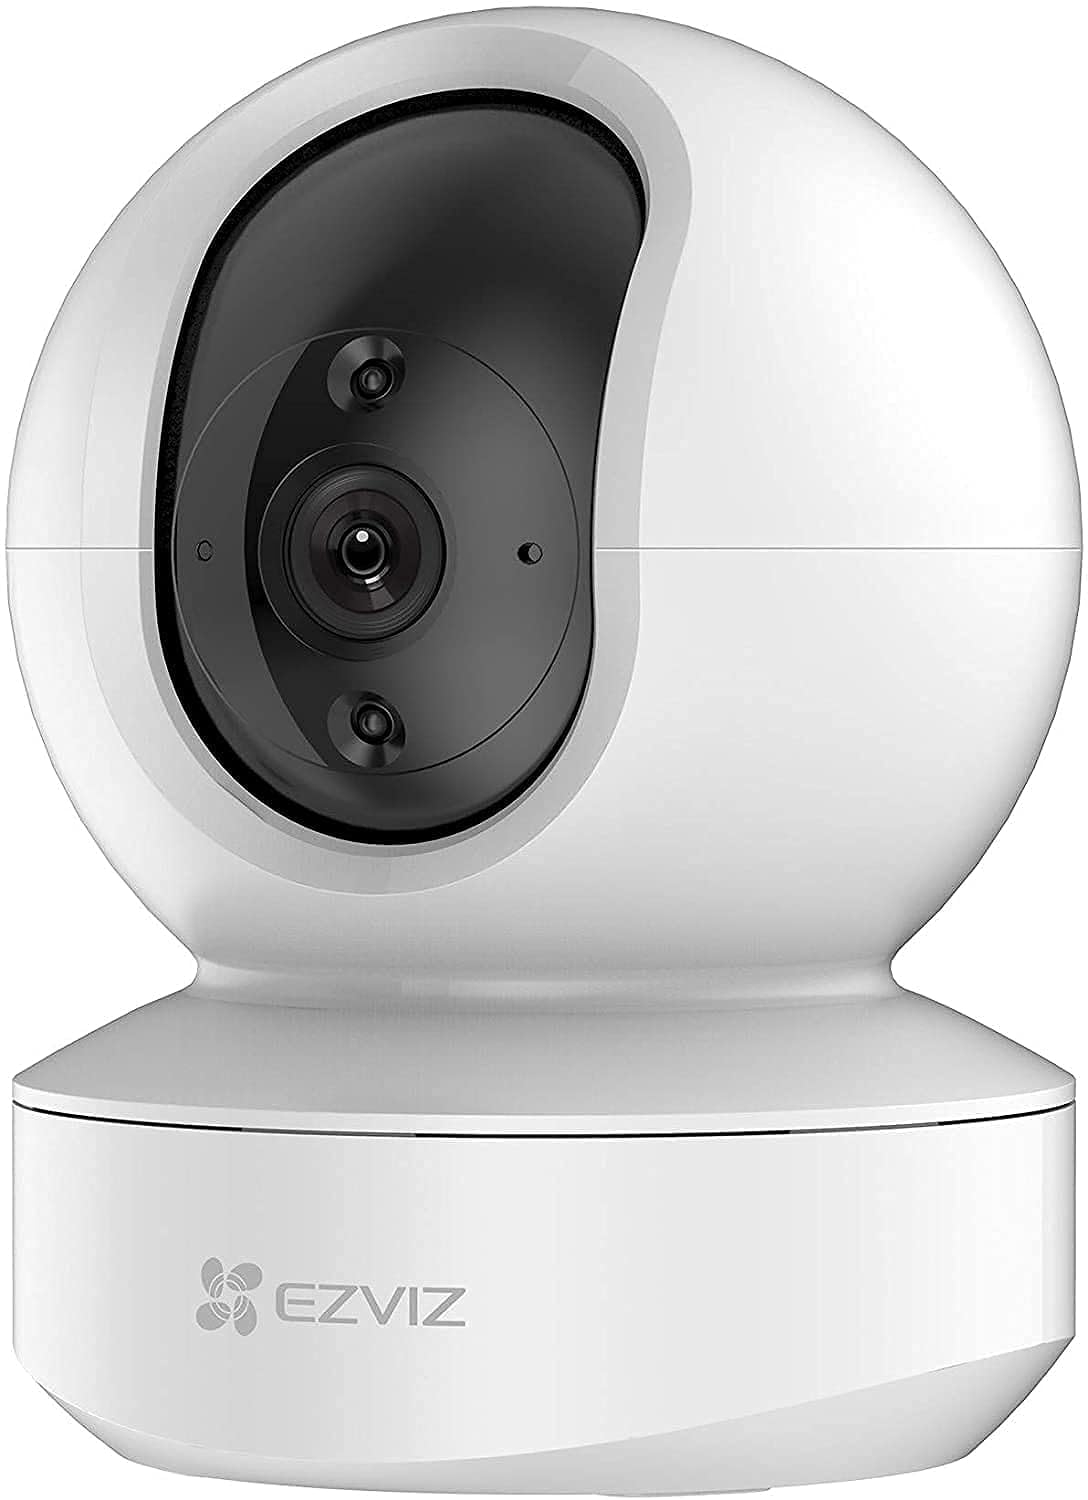 EZVIZ by HIKVISION |4MP Smart WiFi Camera |Night Vision |Motion Detection, Two-Way Talk |Micro SD Slot 256GB (TY1)